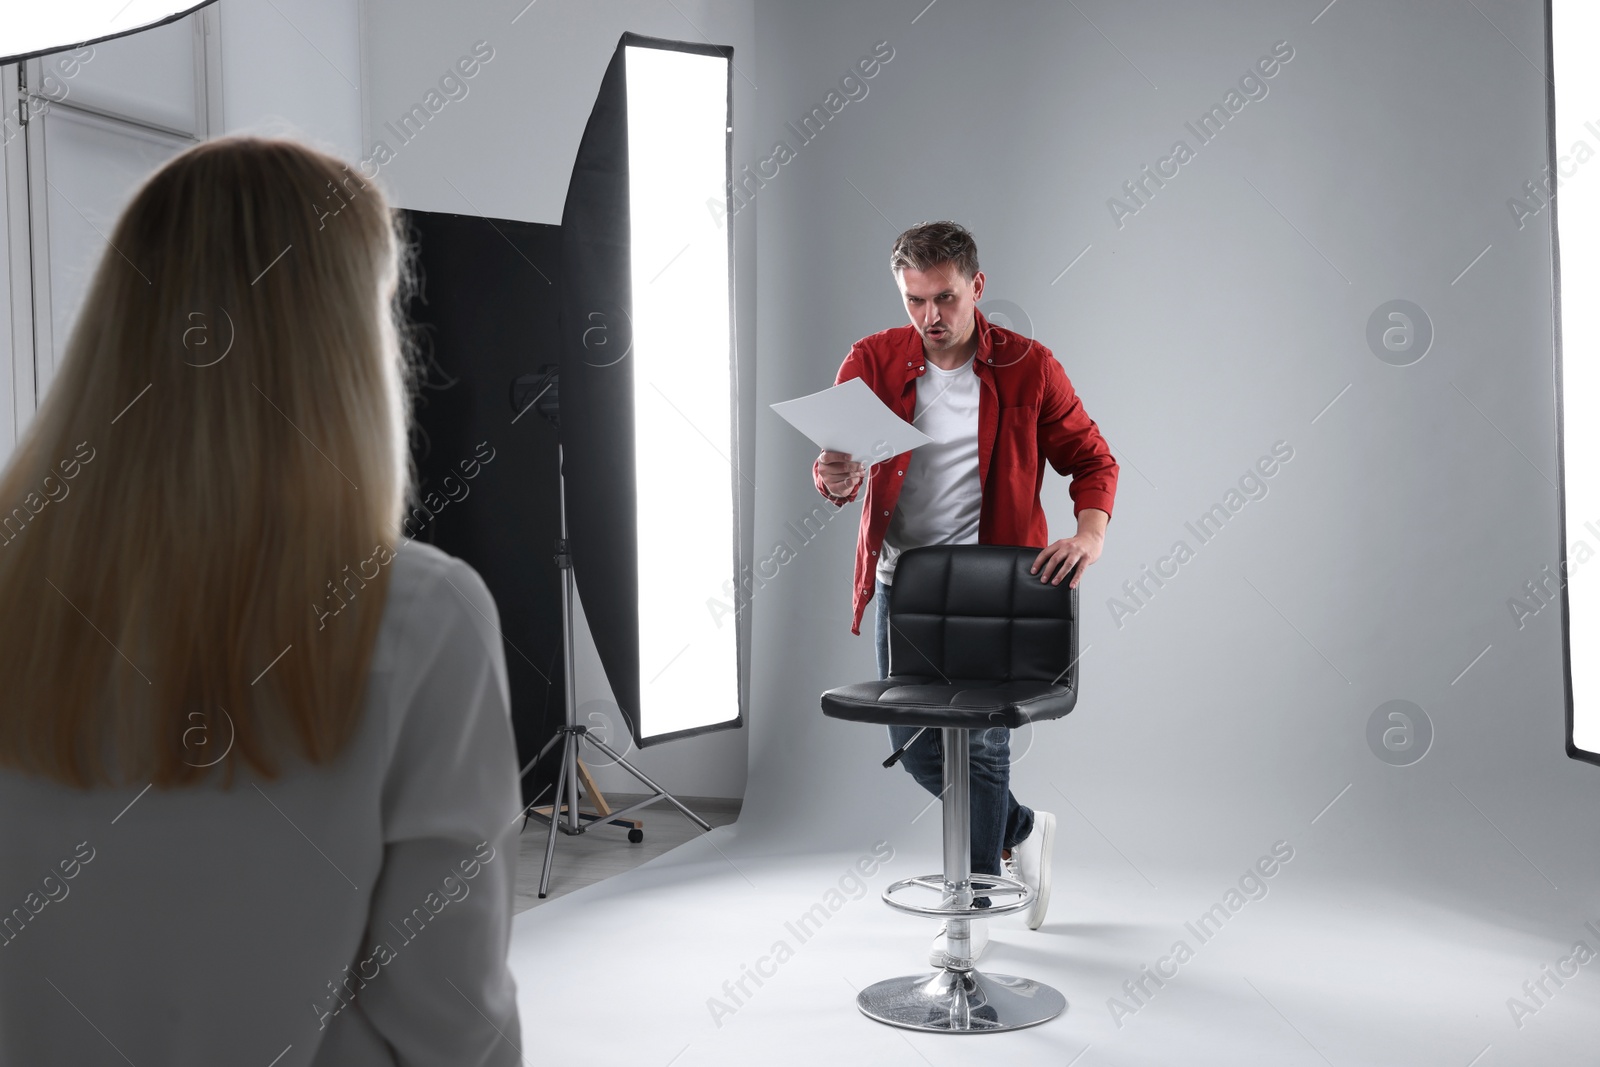 Photo of Emotional man with script performing in front of casting director against light grey background in studio